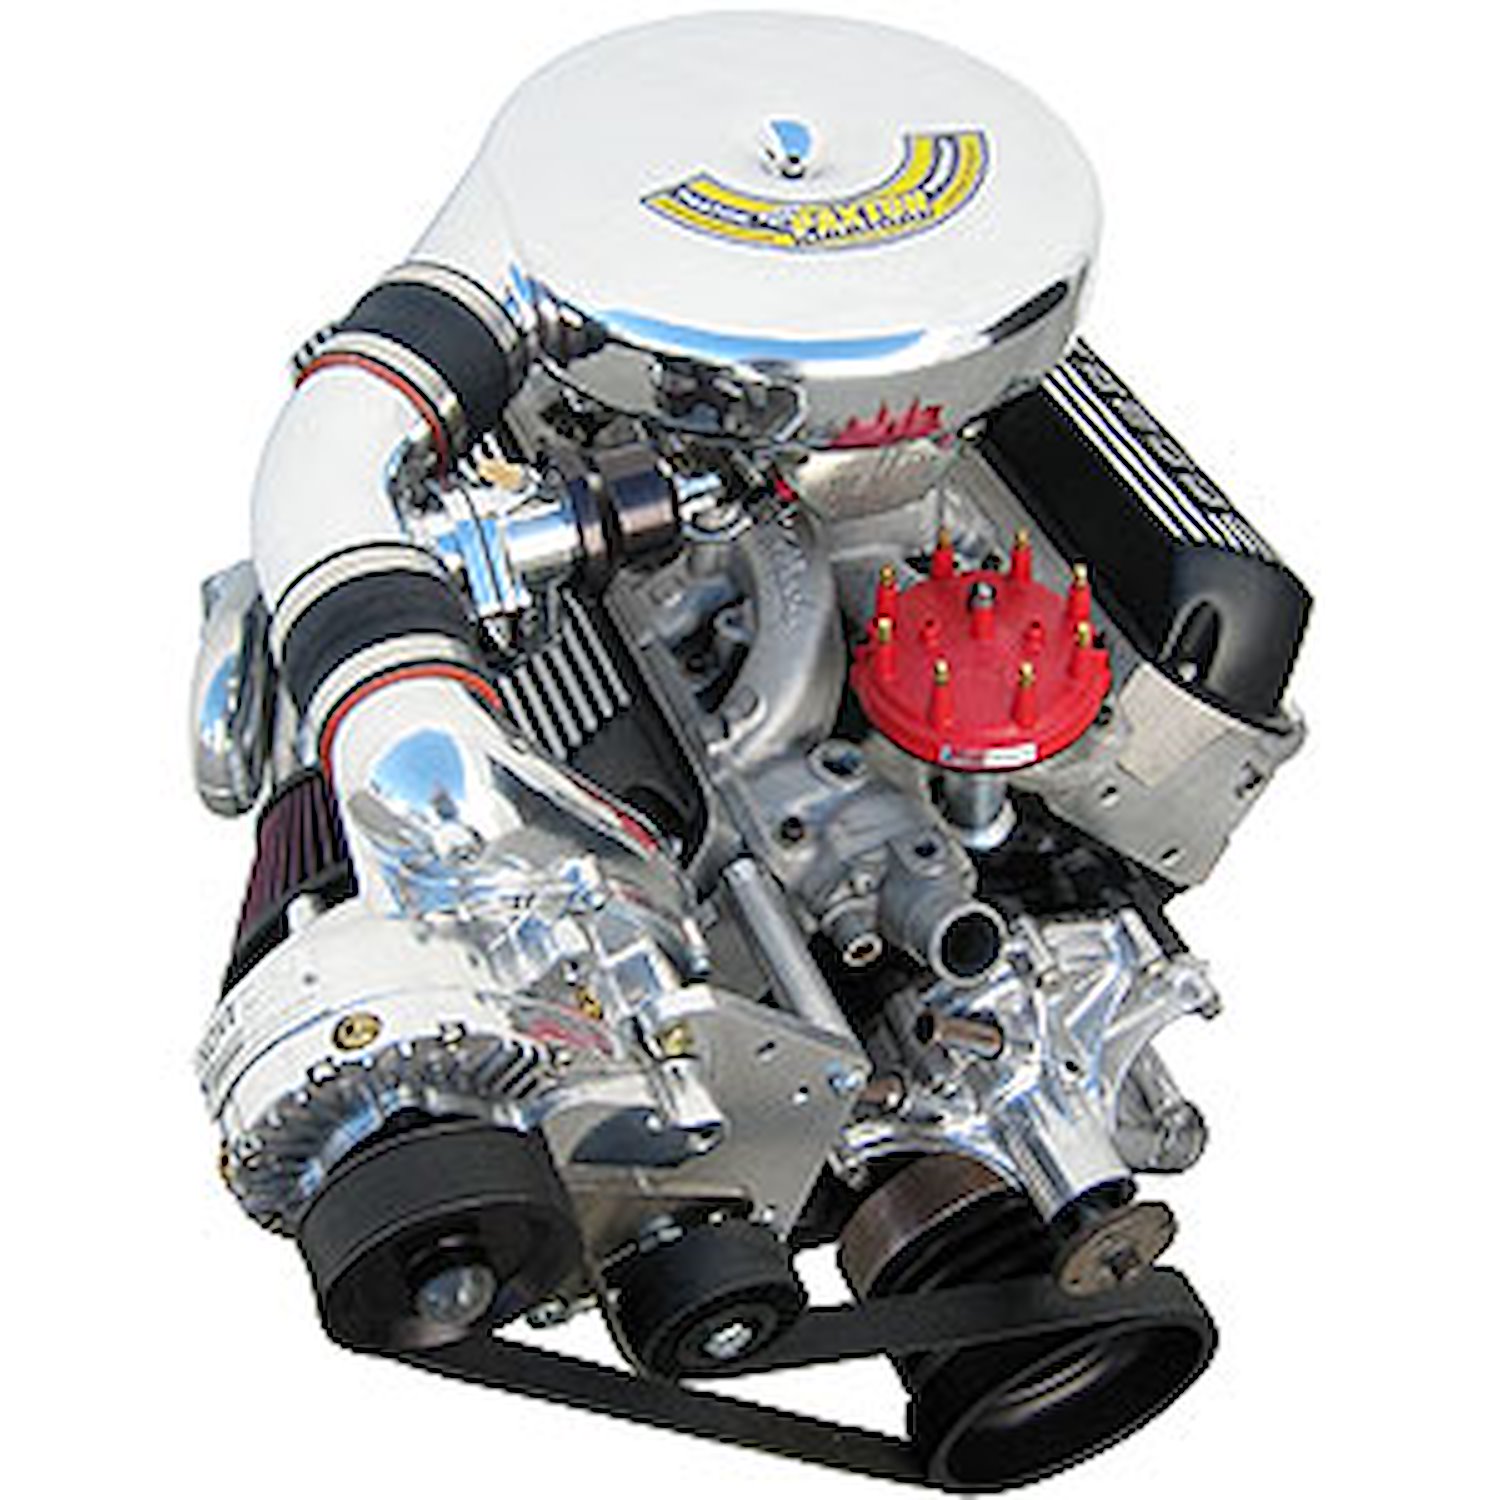 Powerdyne supercharger ford 302 #5